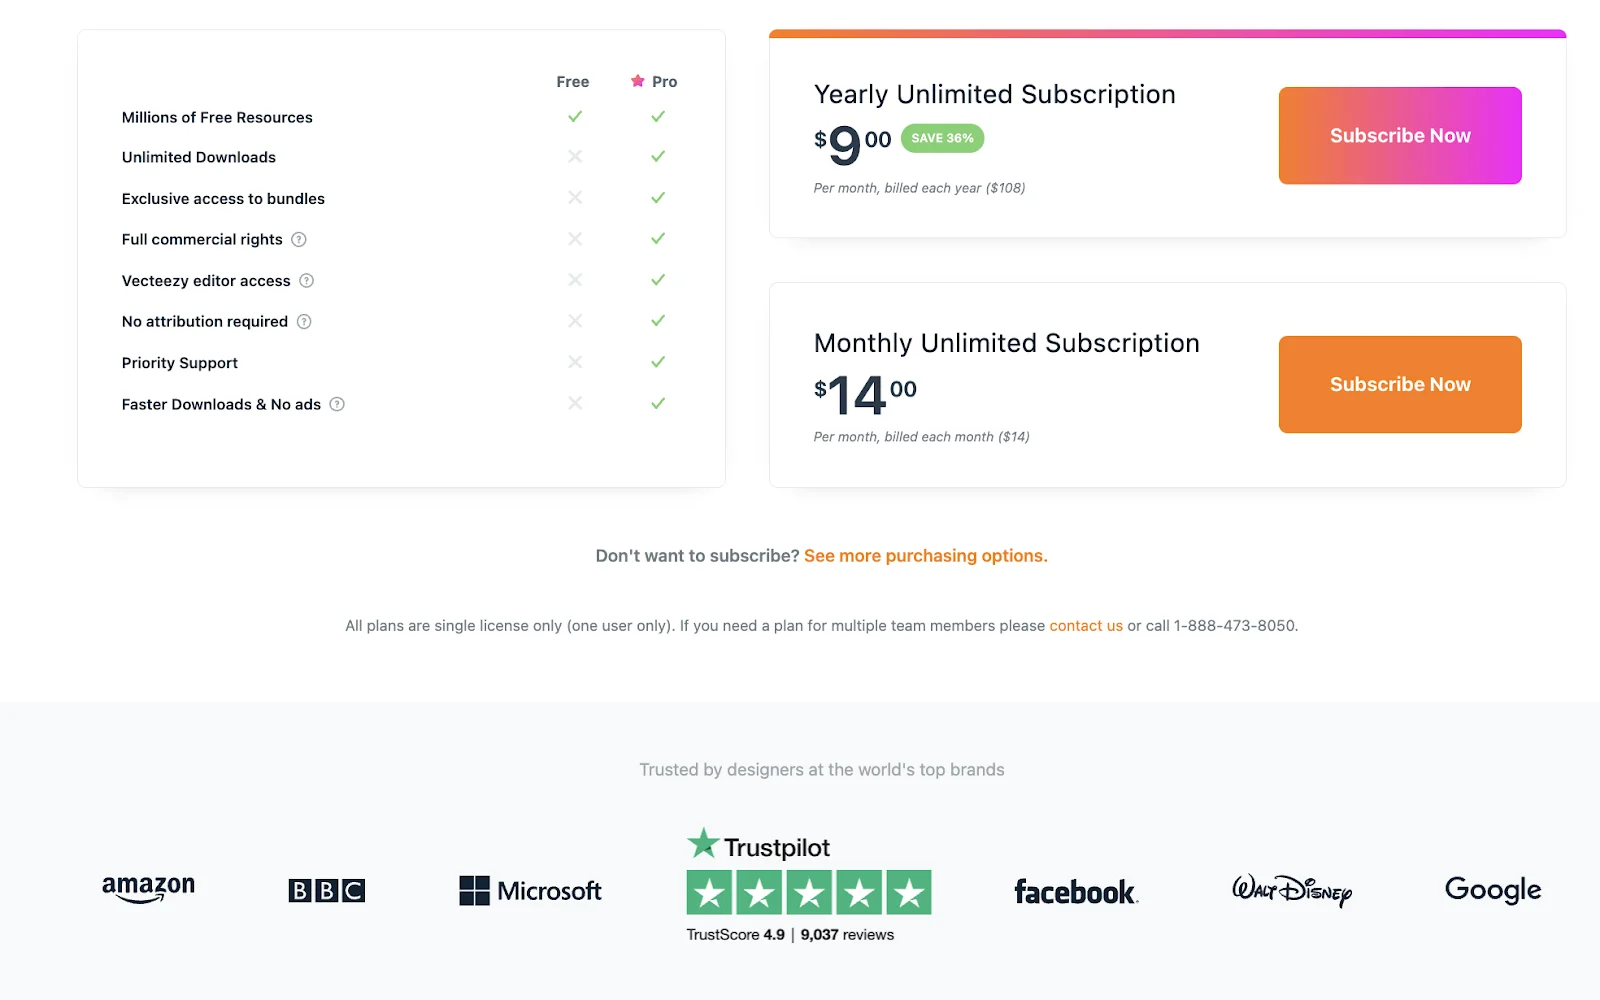 Vecteezy showcases its Trustpilot star rating on the pricing page